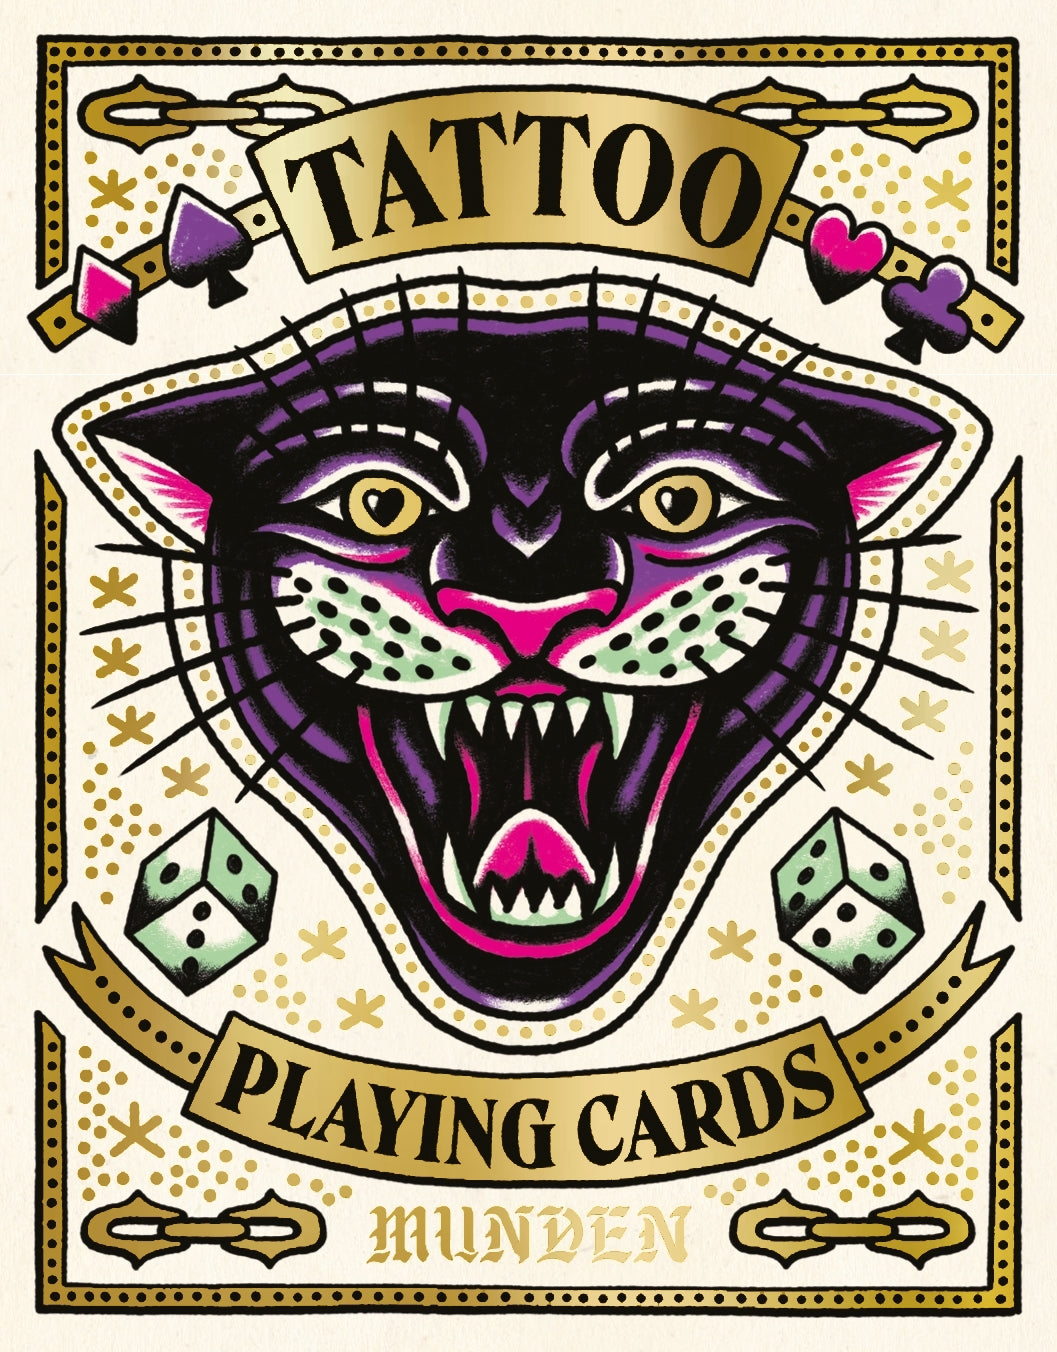 Tattoo Playing Cards by Oliver Munden, The Tattoo Journalist